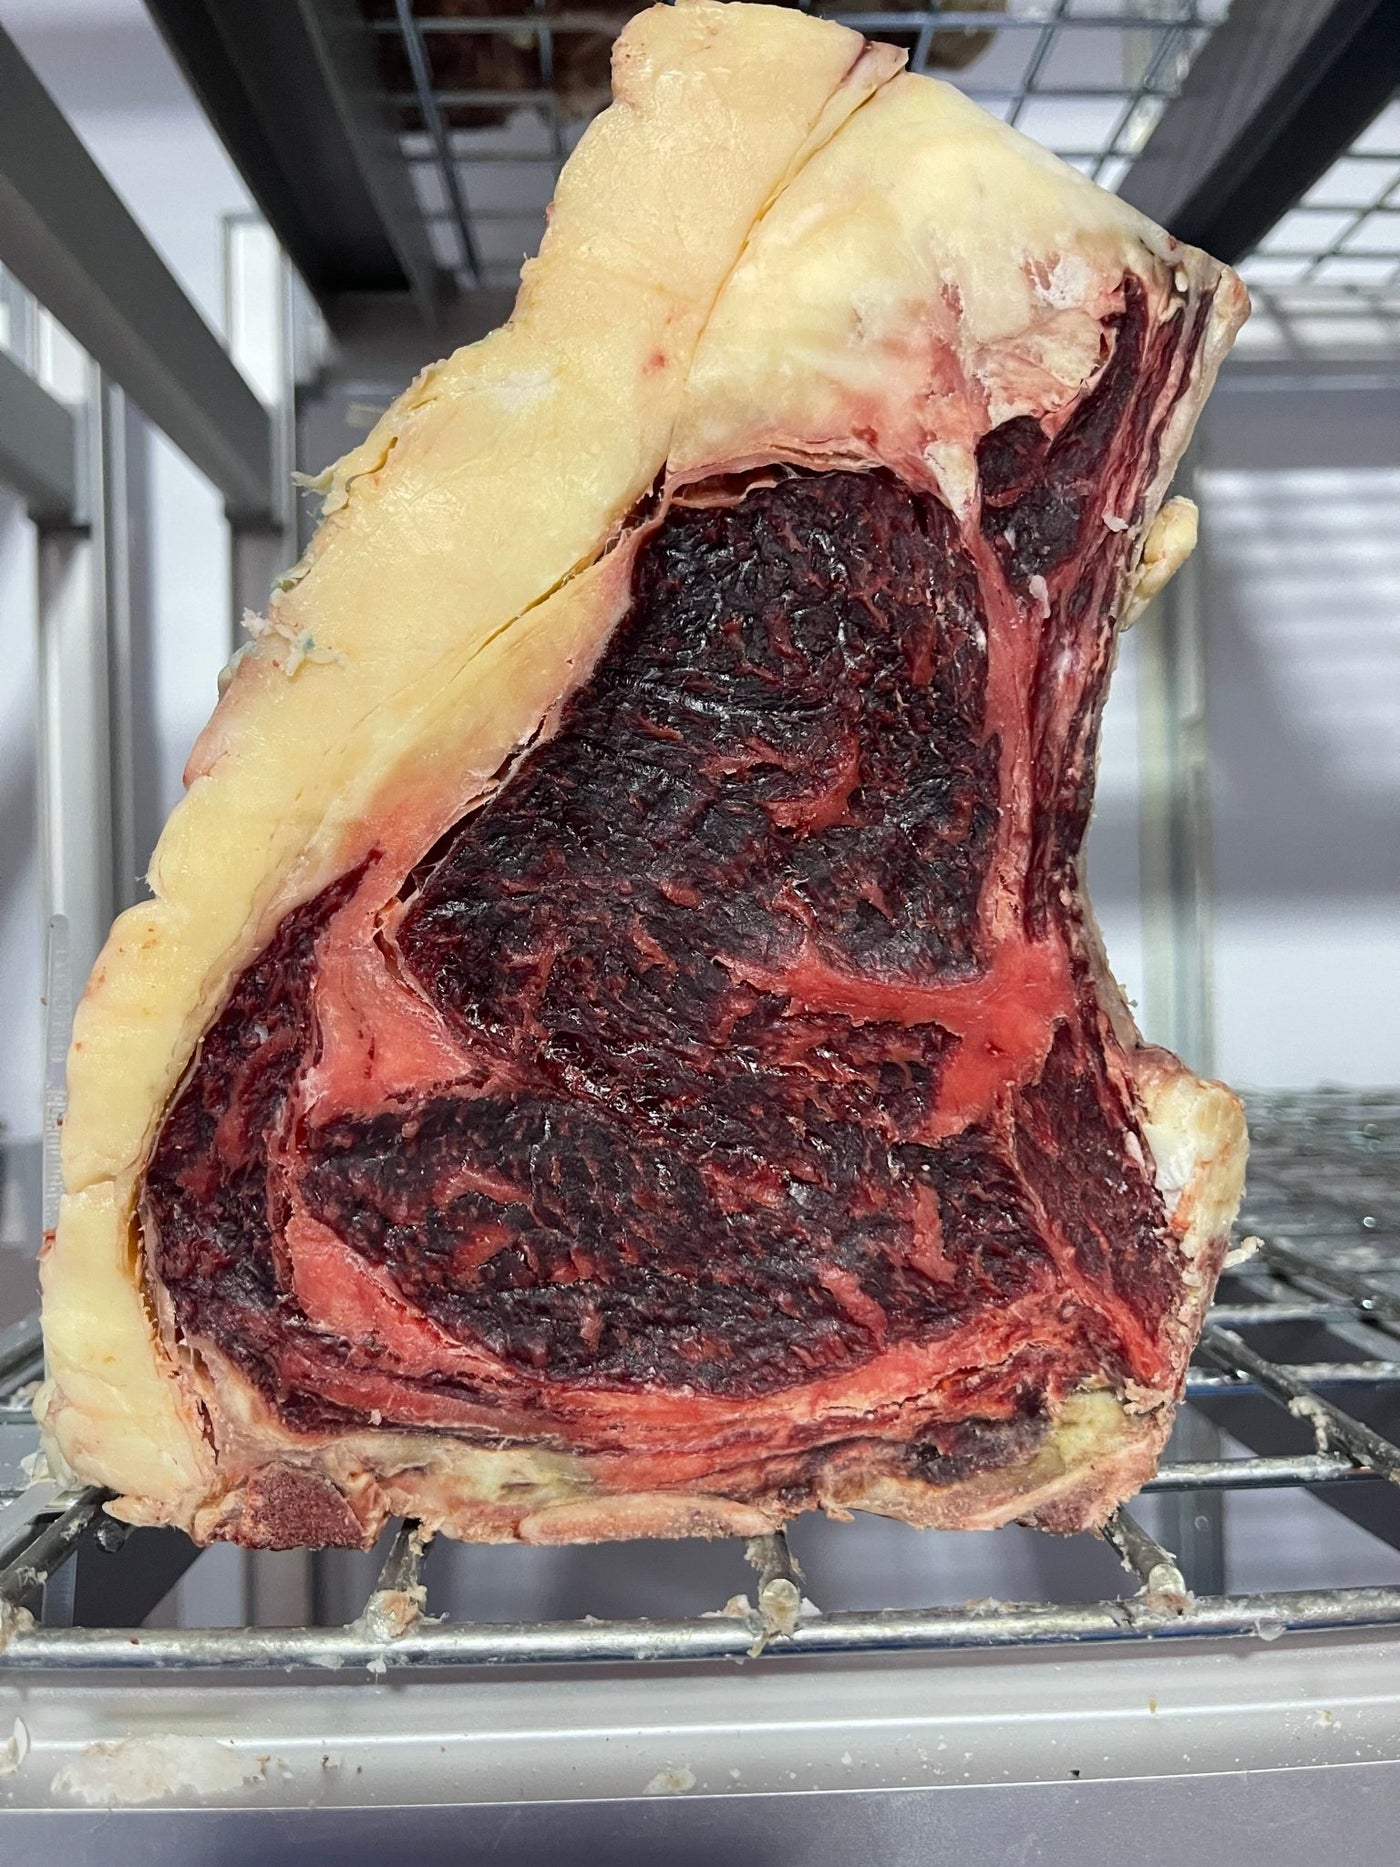 45 Day Dry-Aged Bavarian Simmental (Black Forest) - Thomas Joseph Butchery - Ethical Dry-Aged Meat The Best Steak UK Thomas Joseph Butchery